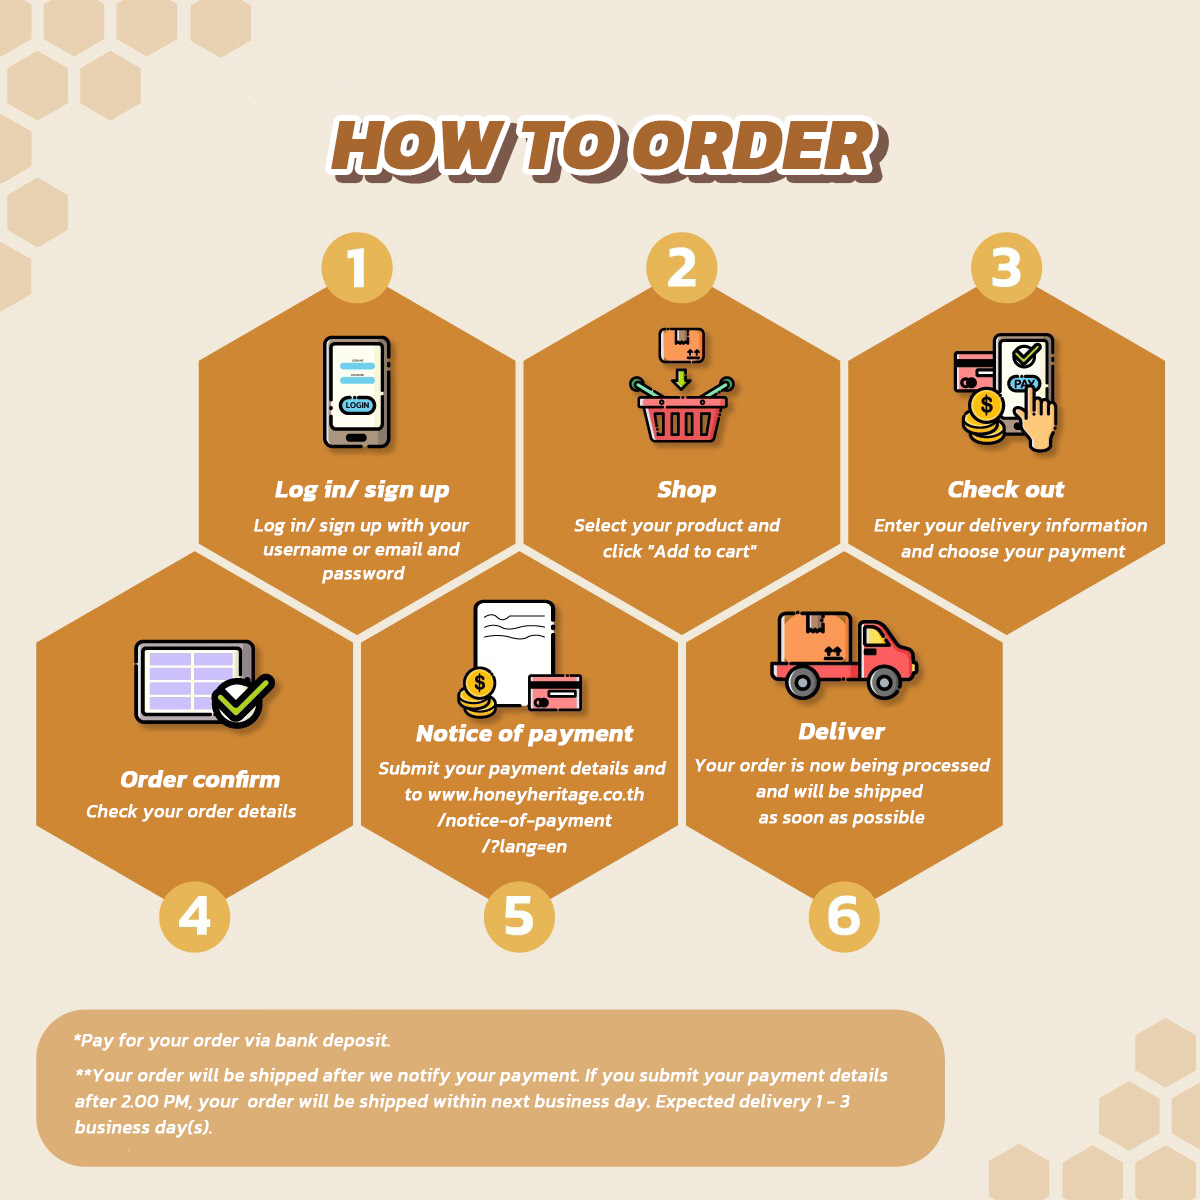 HOW TO ORDER - Honey Heritage